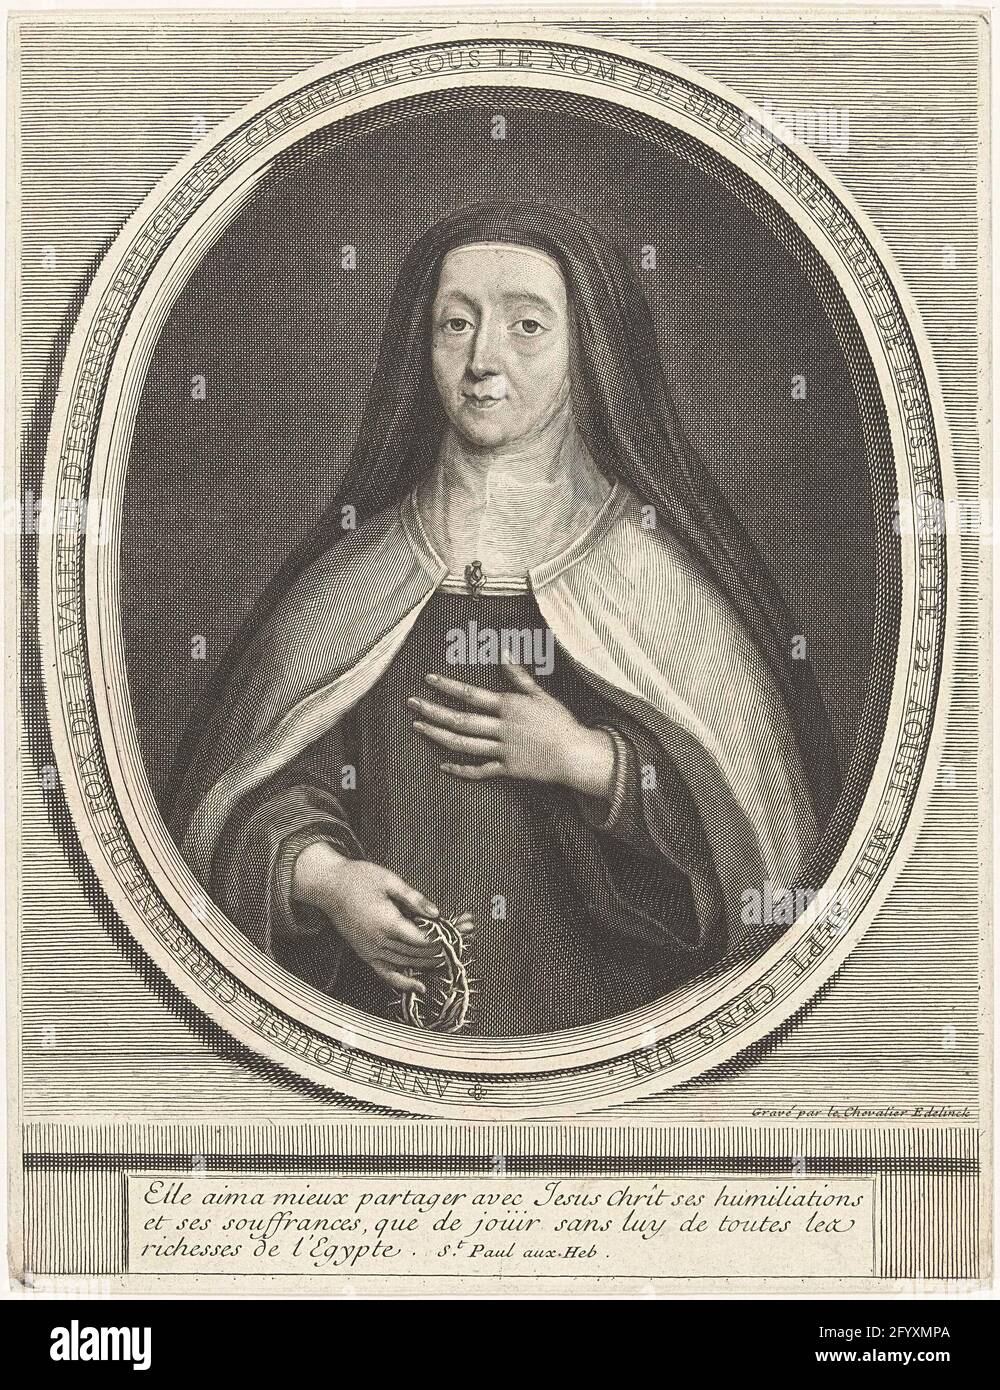 Portrait of Anne-Louise Christine de Foix de la Valette d'Epernon. Portrait in half of Carmelietes Sister Anne-Louise-Christine de Foix de la Valette d'Epernon (1622-1701). Pictured with thorn wreath in right hand, in oval frame with text, including three Latin lines. Stock Photo